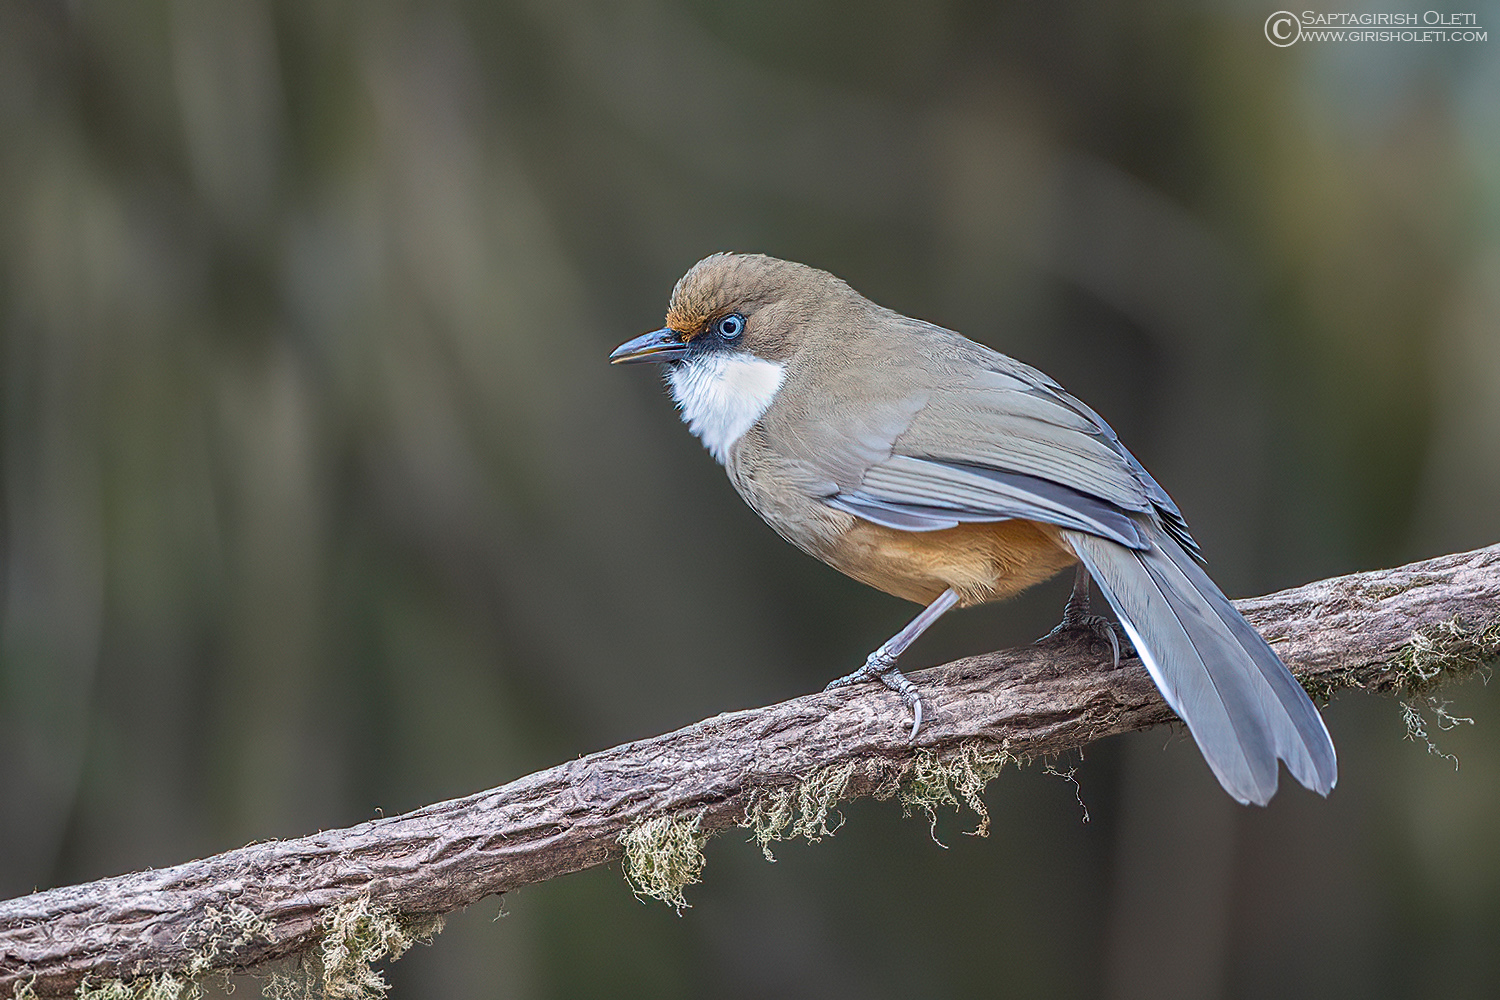 White-throated Laughingthrush photographed at Tiger hills, Darjeeling